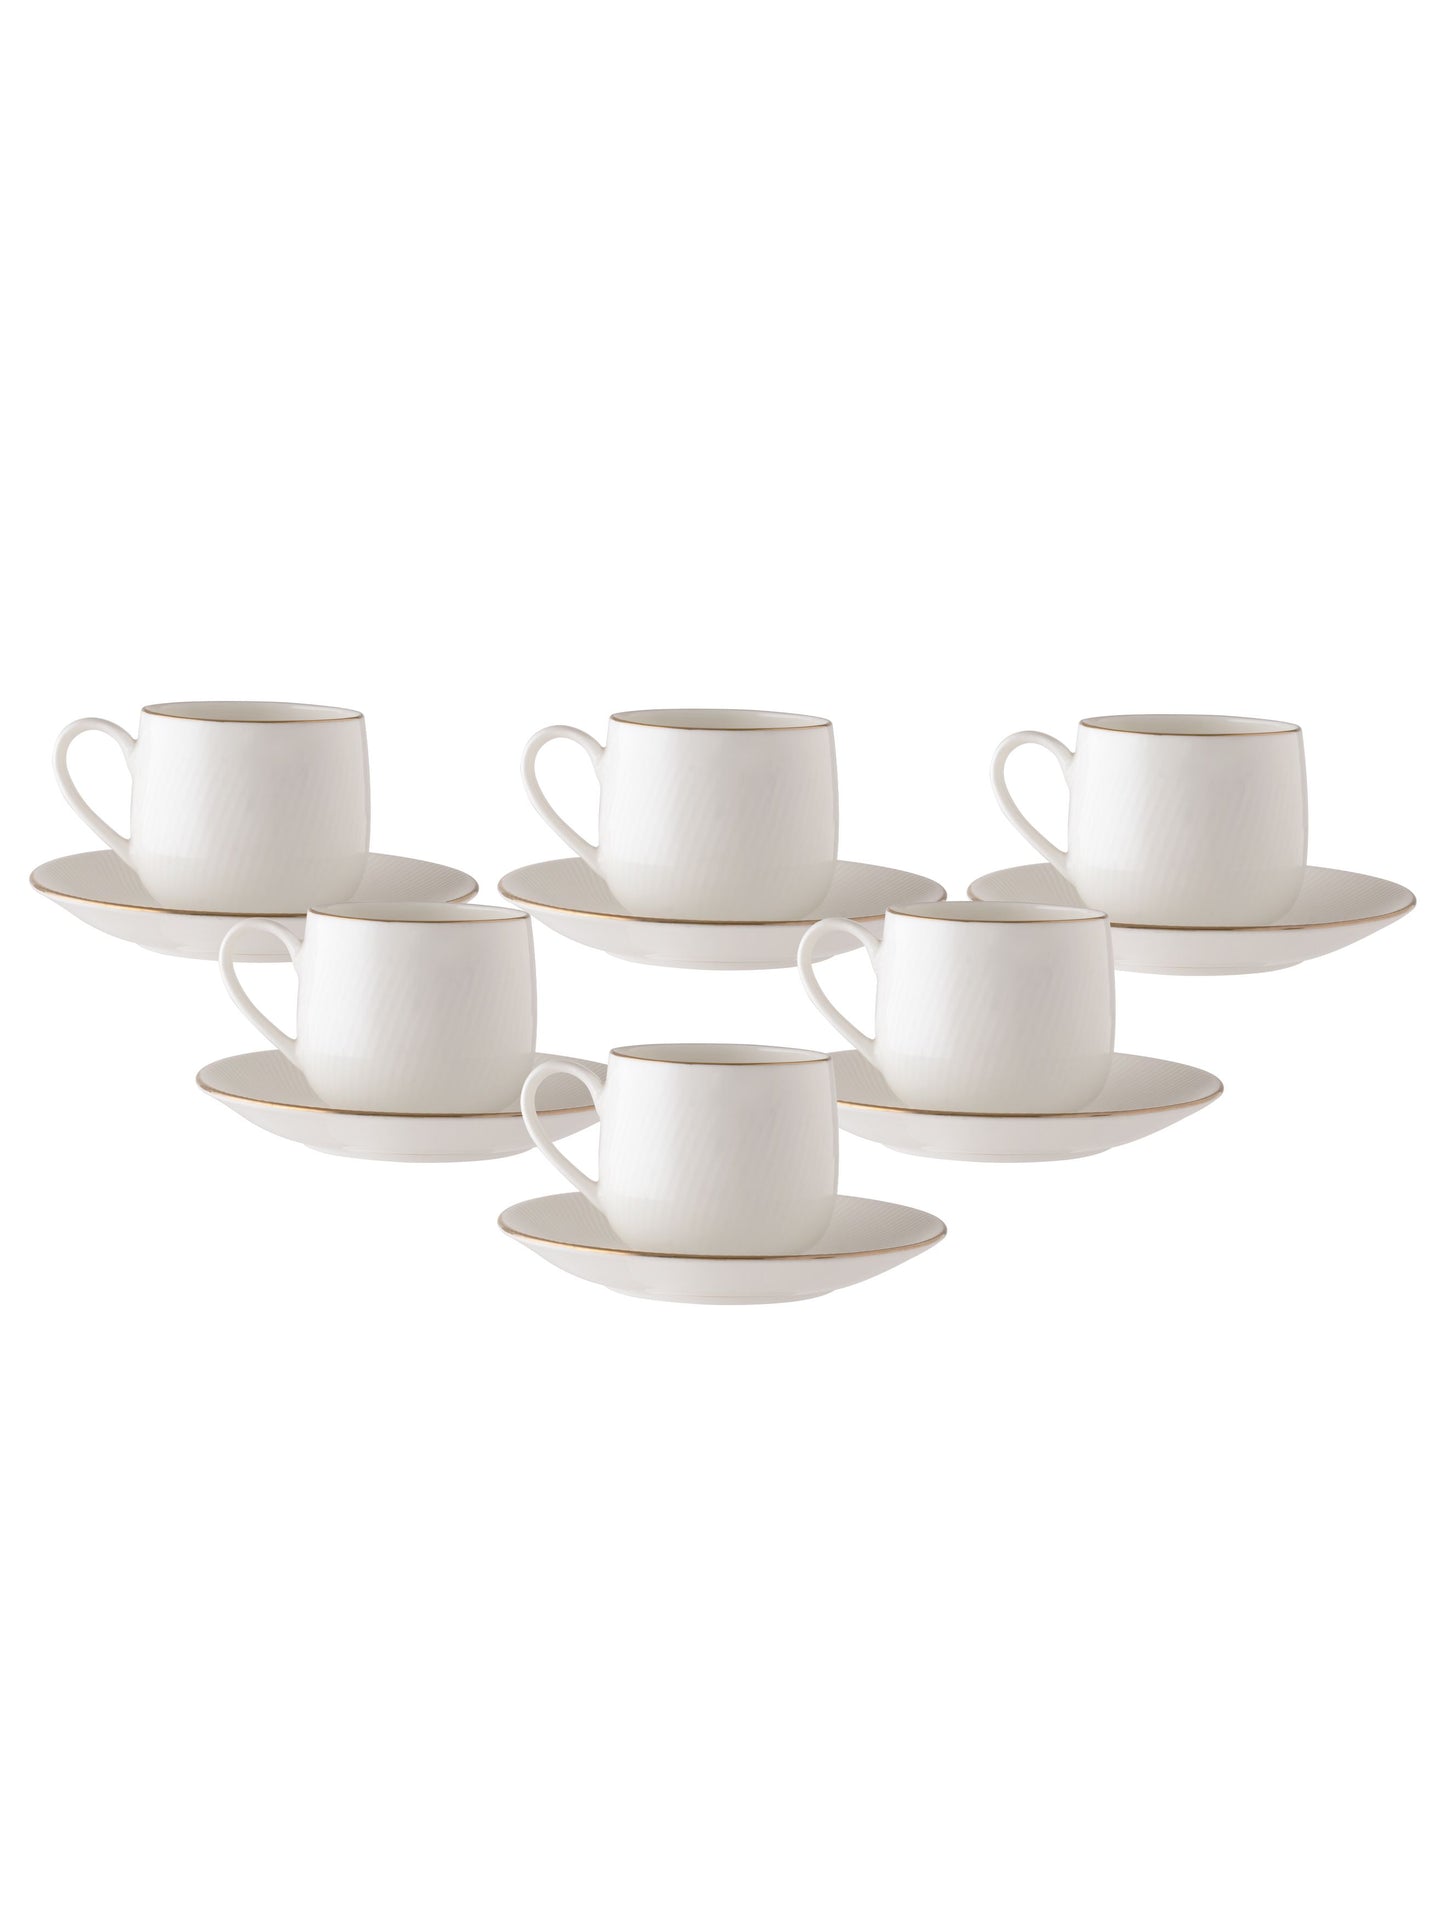 Twig Impression Cup & Saucer, 180ml, Set of 12 (6 Cups + 6 Saucers) (1101)